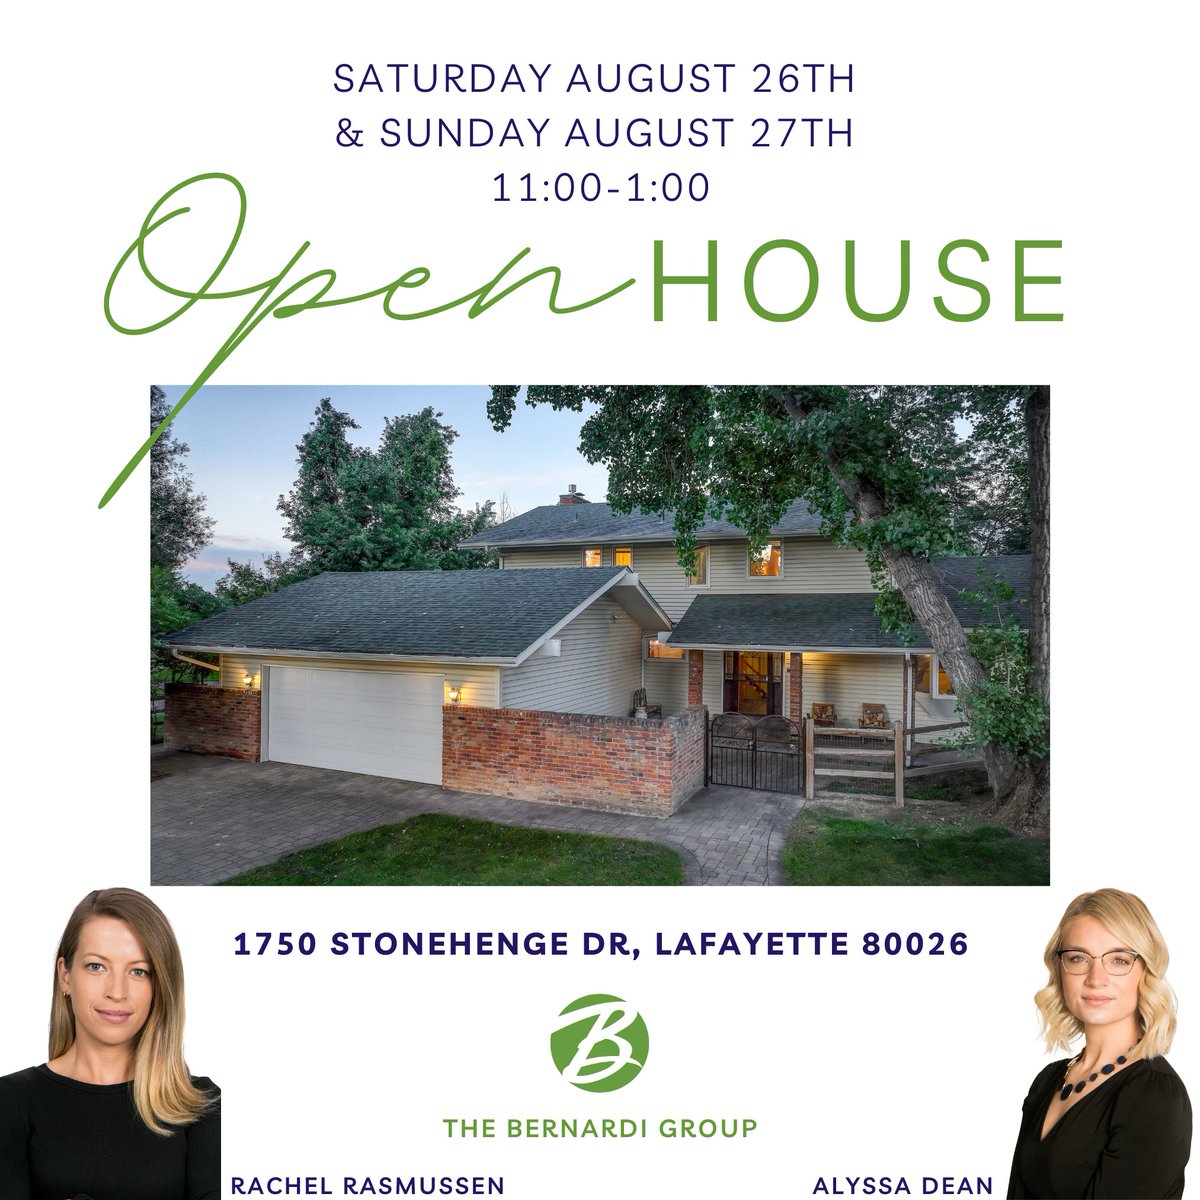 We are hosting 3 Open Houses this weekend on 2 homes. Come see our new listing on Stonehenge on both Saturday and Sunday! And, call the office at 303.402.6000 with any questions. #lafayettecolorado #lafayettecohomes #bouldercountyhomes